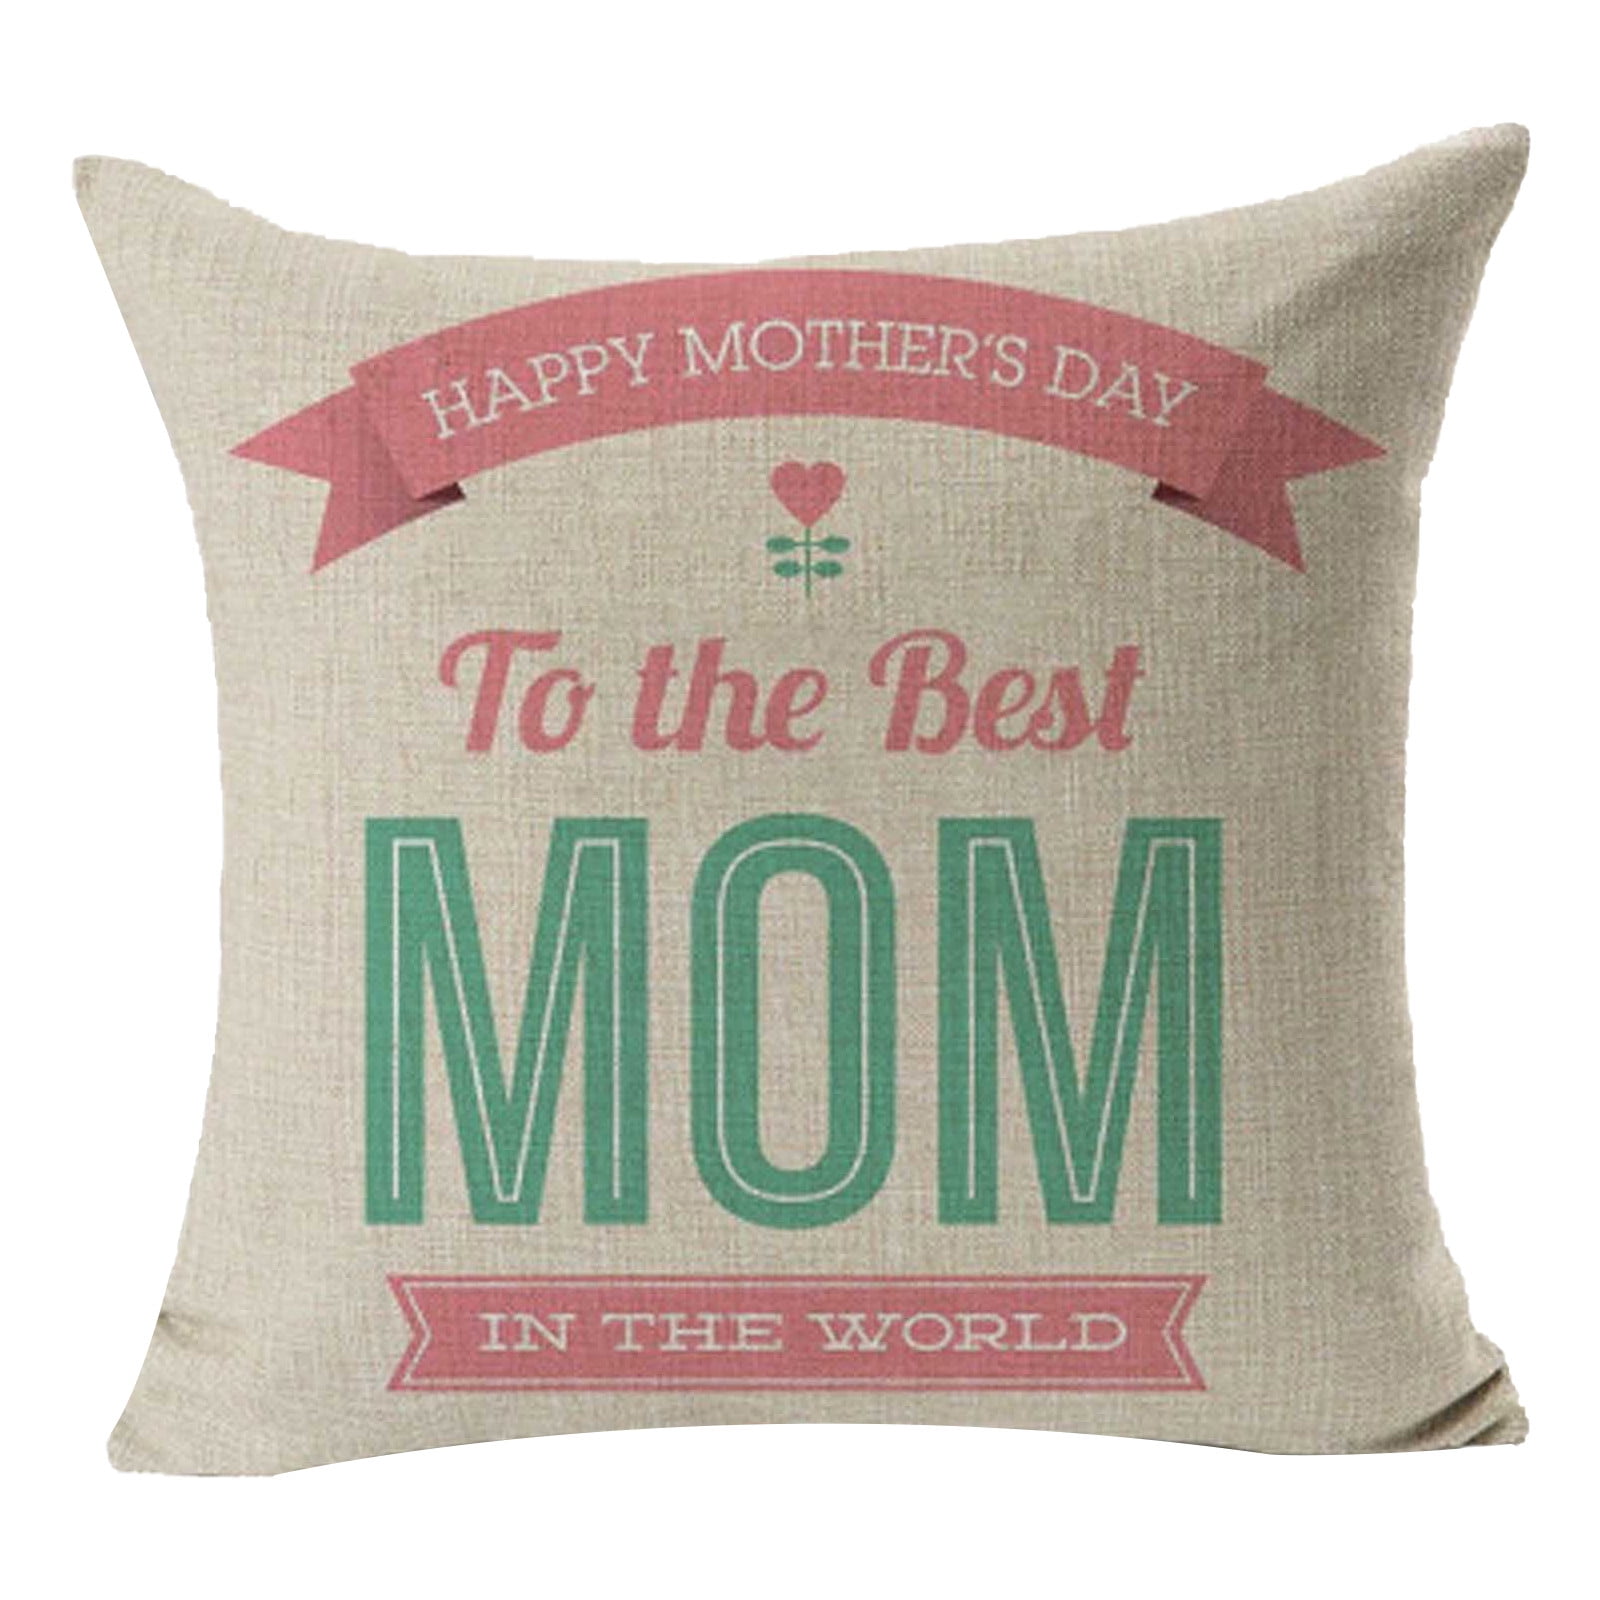 Getagift To the best mum for all the times I love you Mother’s Day Thanks Giving Cushion for Bedroom/Sofa Car Cotton/Linen Cushion Throw Pillow Cushion Birthday, Linen Cover 